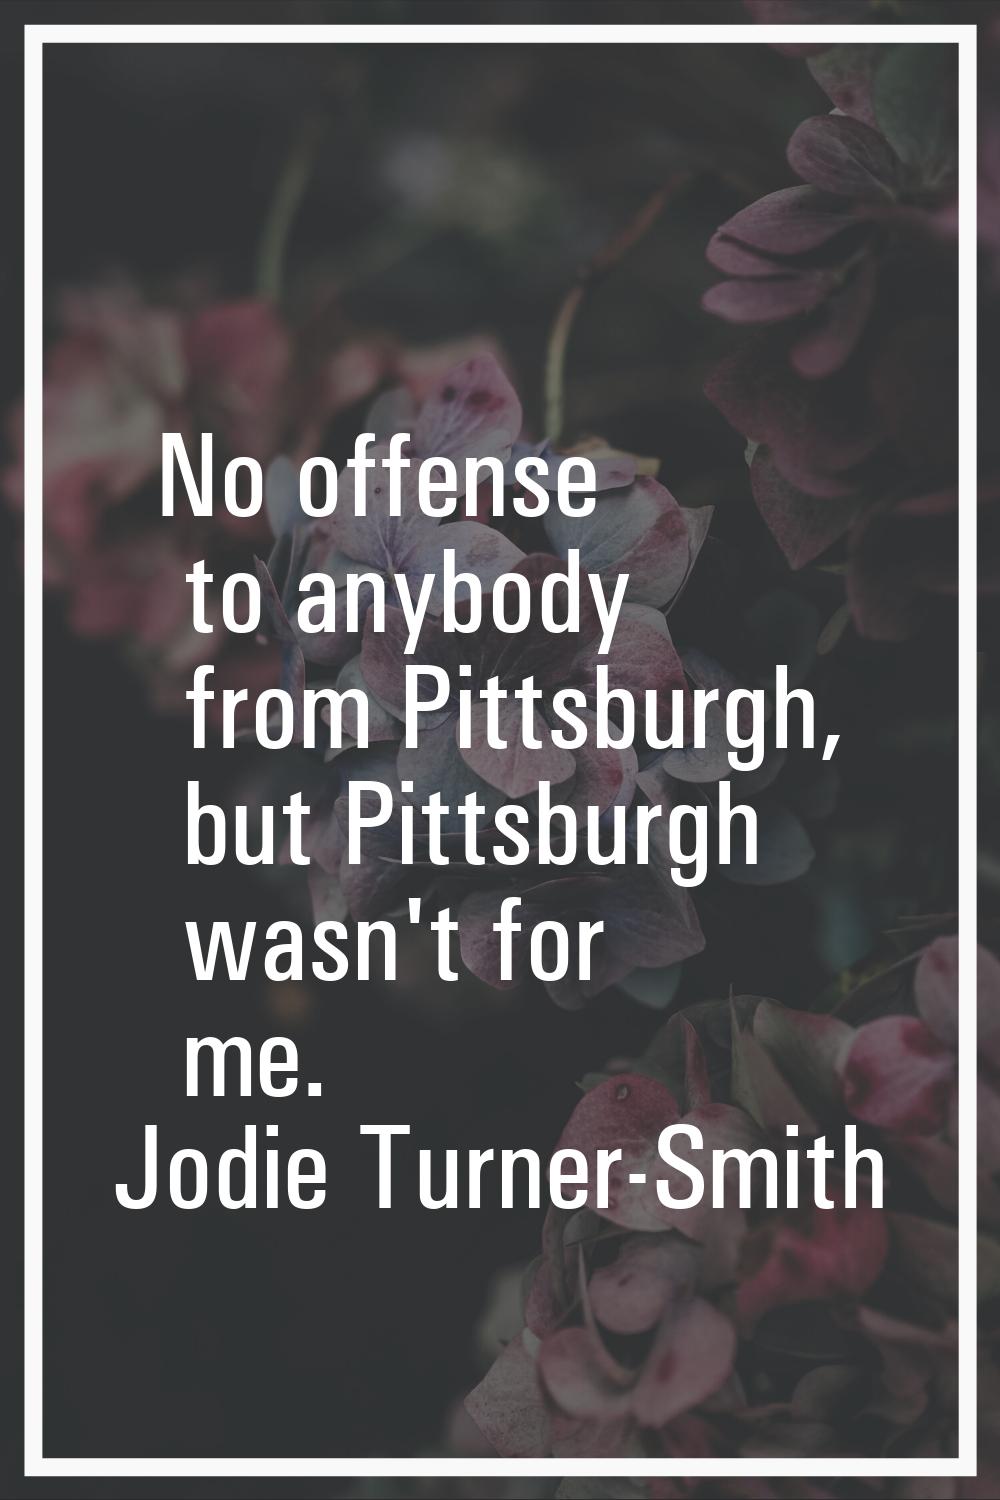 No offense to anybody from Pittsburgh, but Pittsburgh wasn't for me.